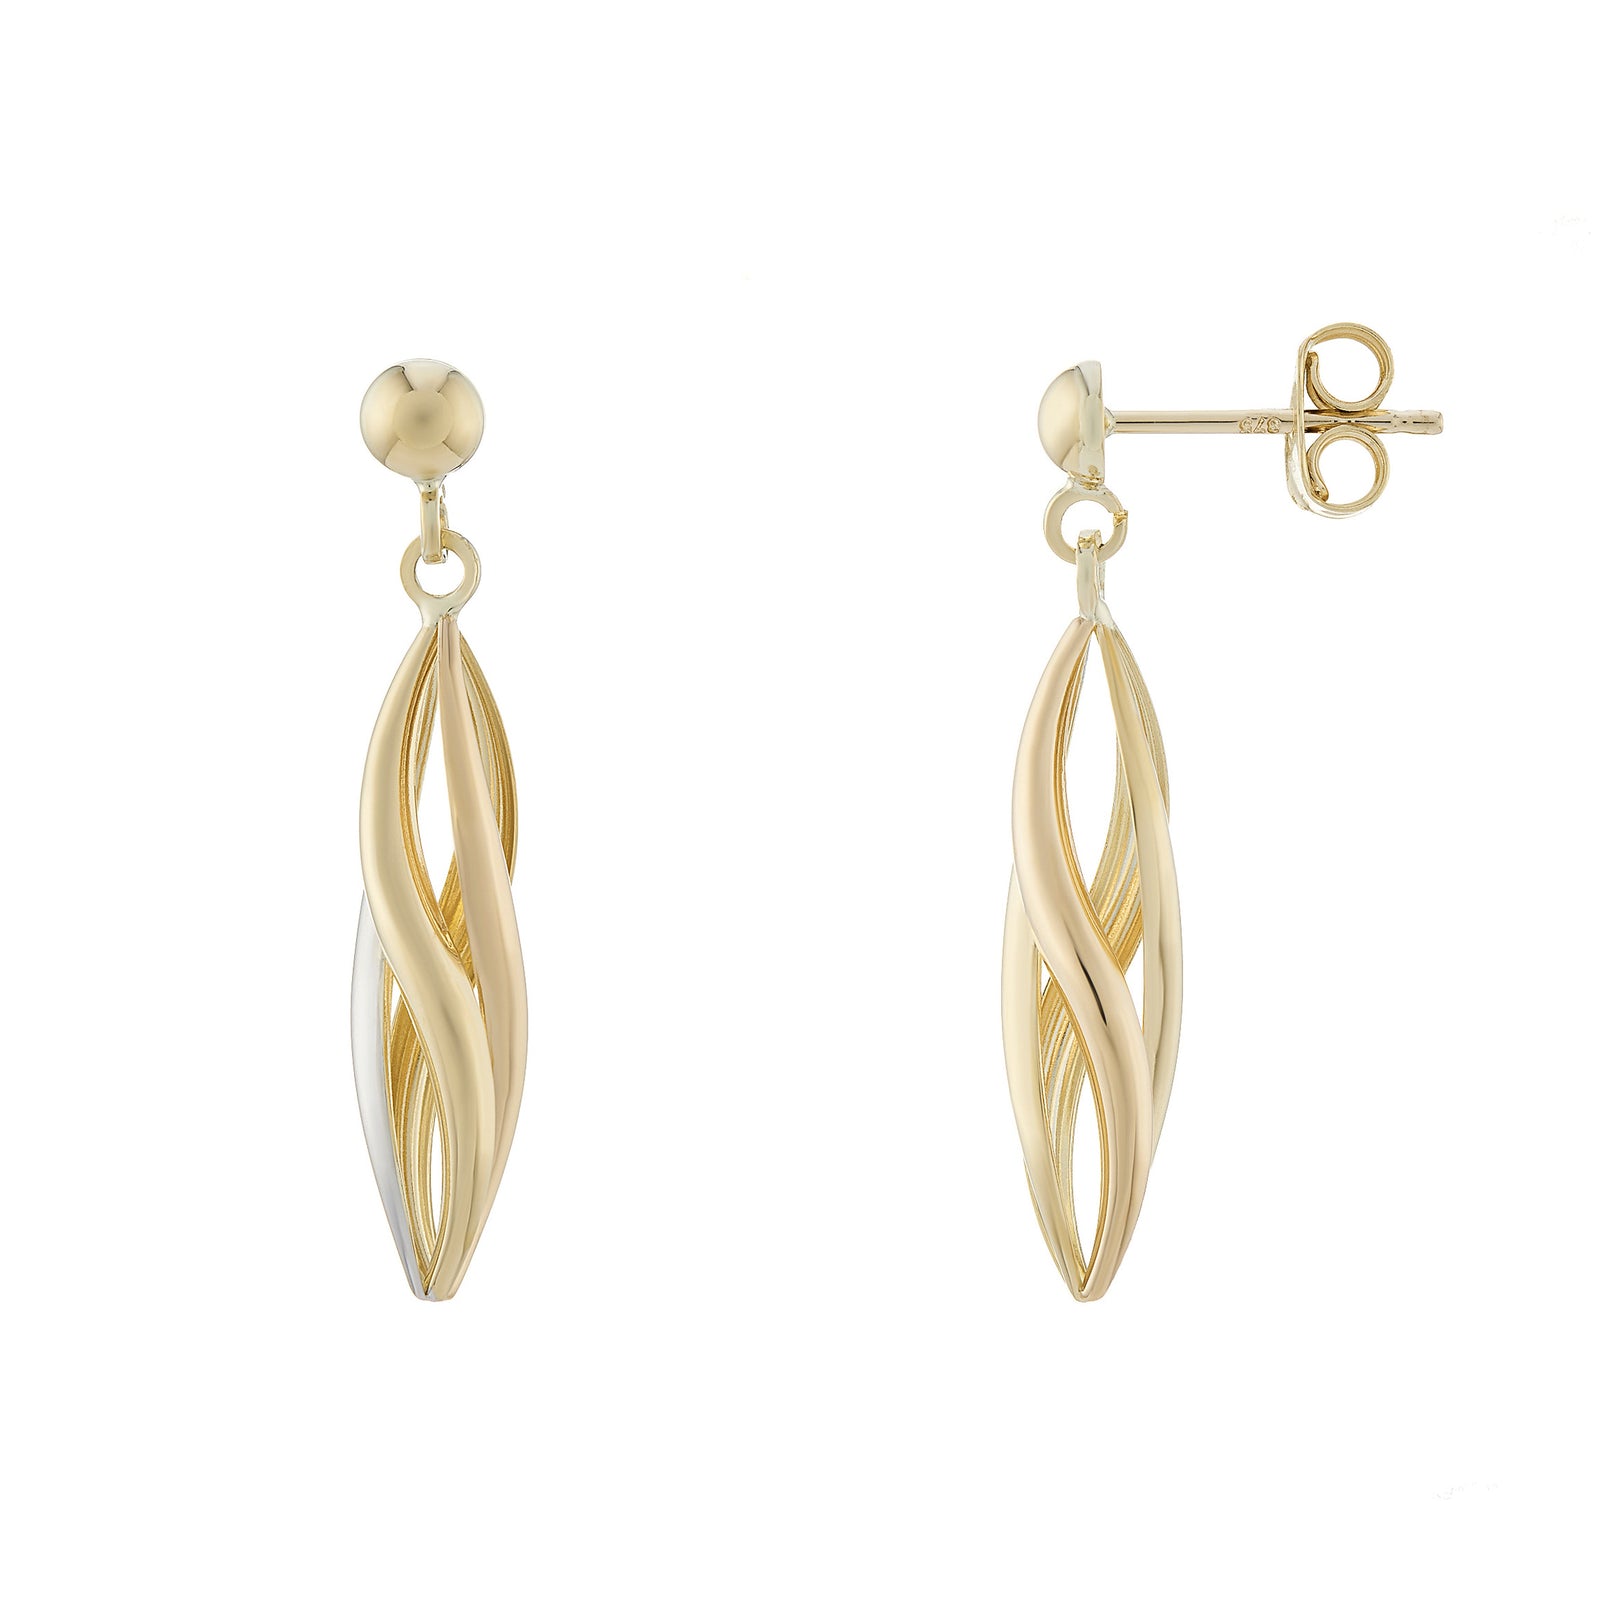 9ct gold 3 colour gold drop earrings